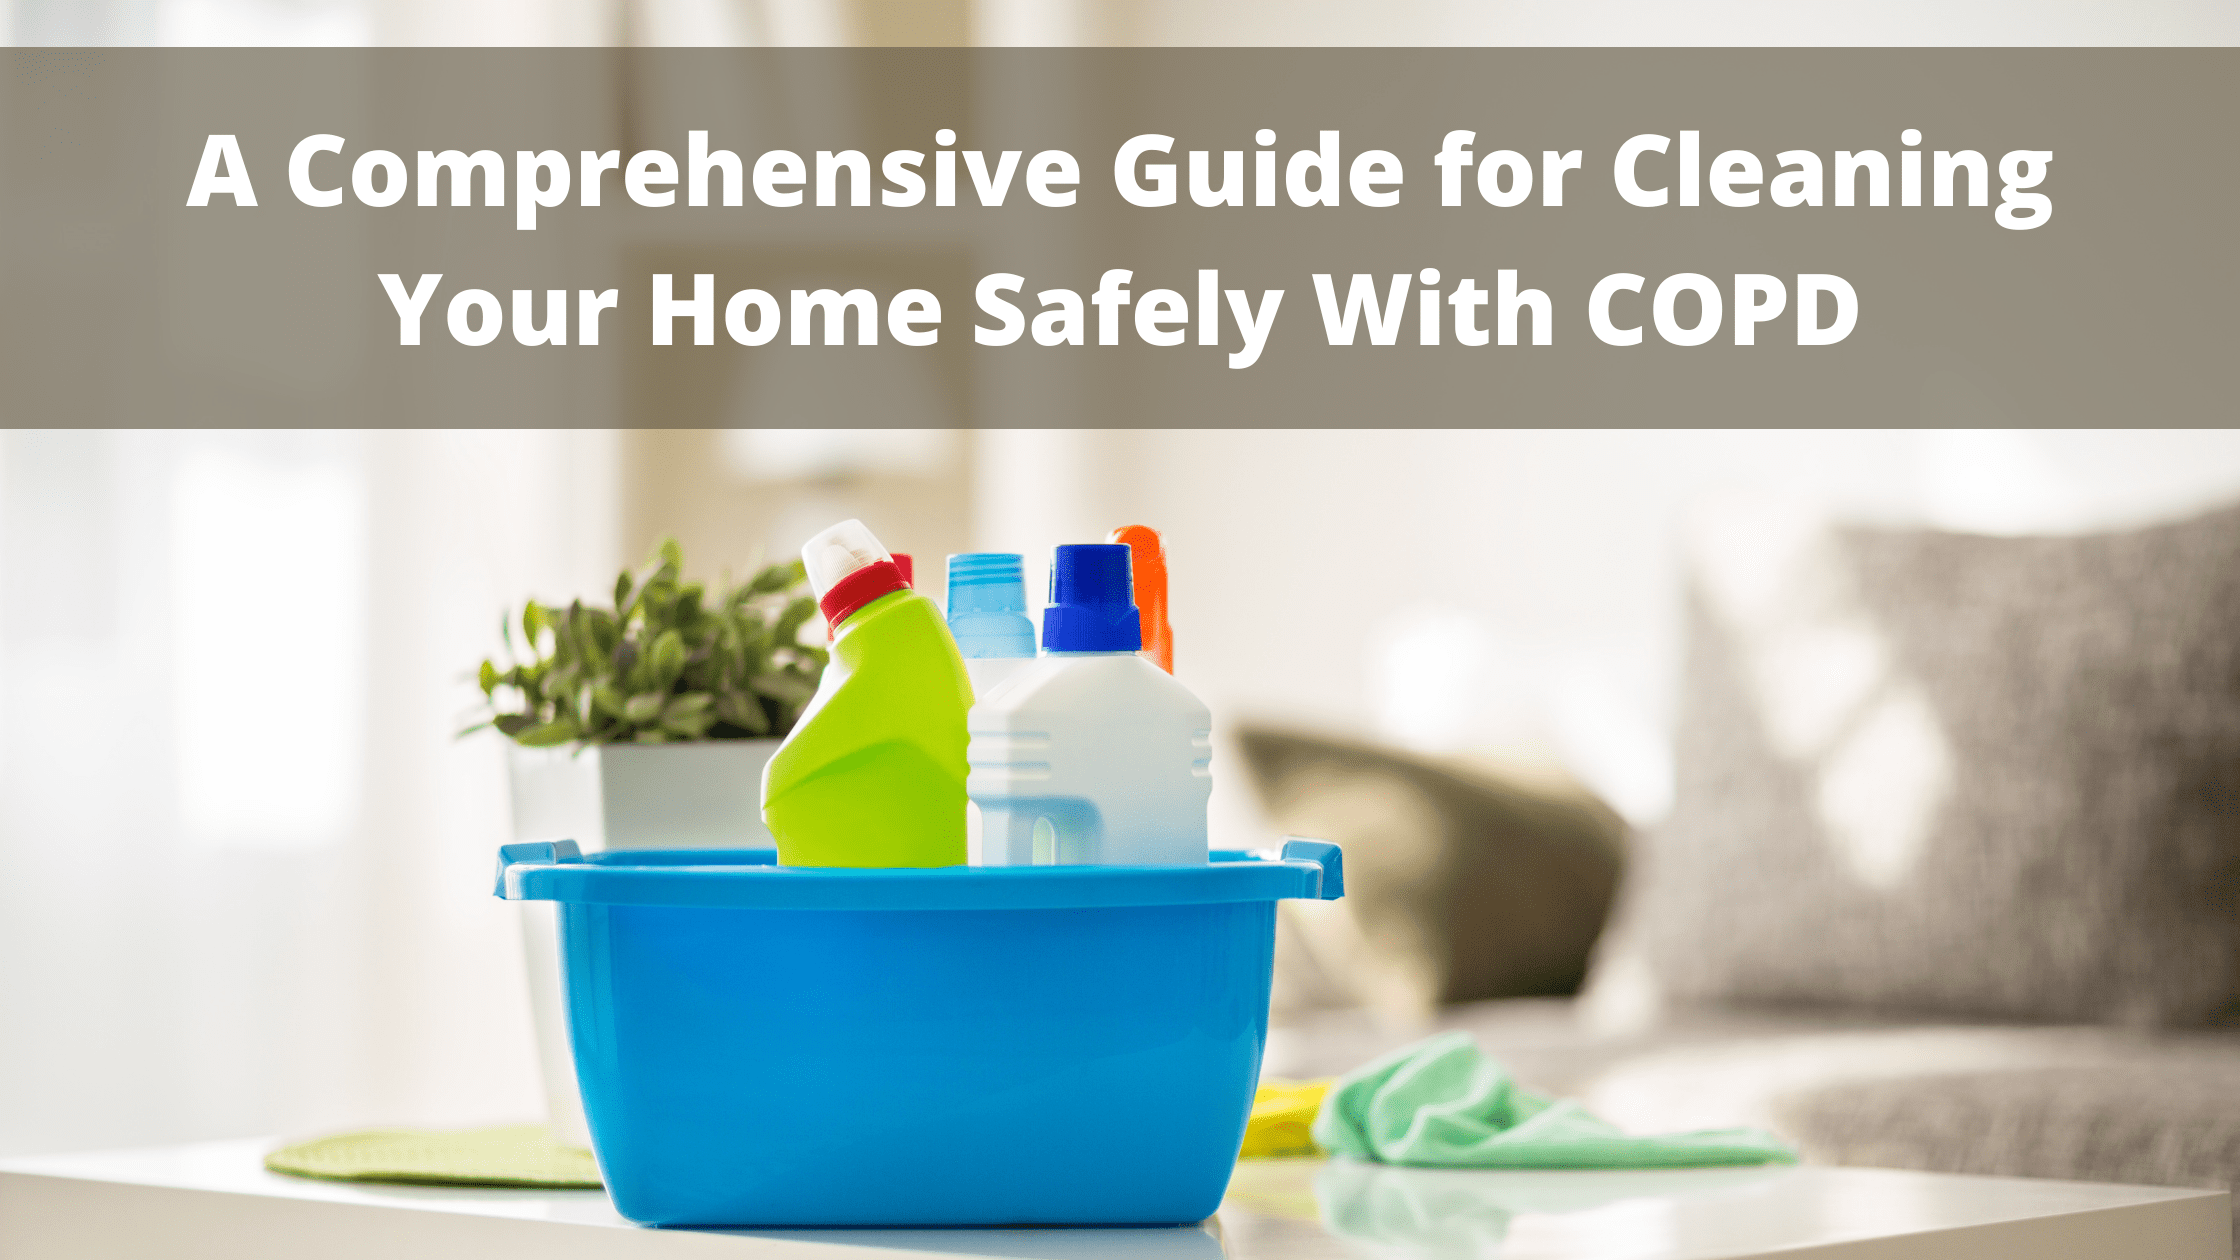 A Comprehensive Guide for Cleaning Your Home Safely With COPD